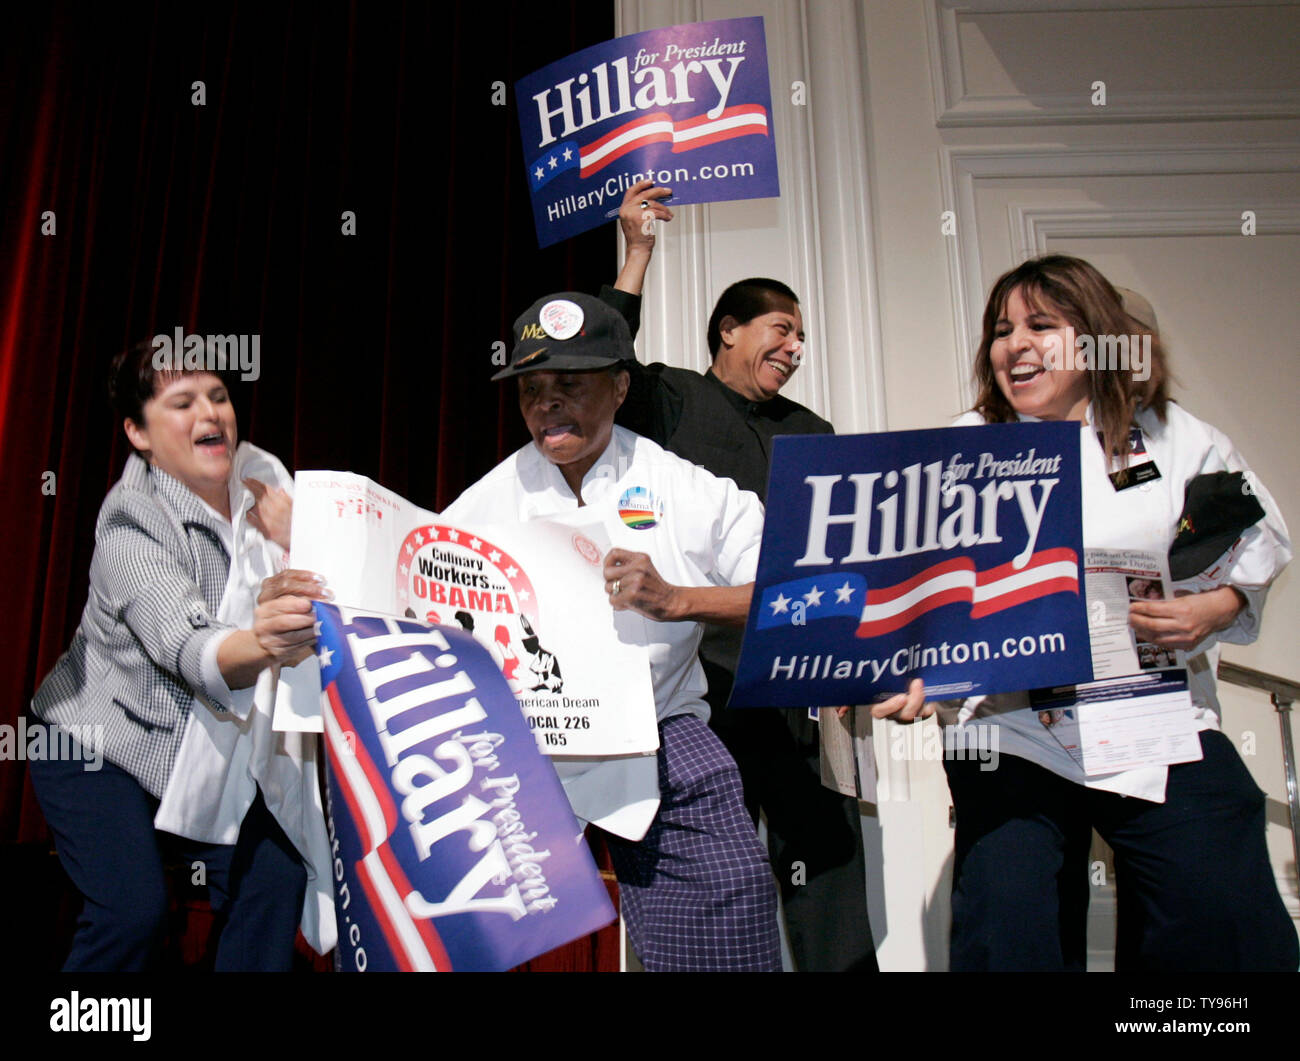 Attendees jockey for position with their signs showing their support for candidates Sen. Hillary Clinton (D-N.Y.) and Sen. Barack Obama (D-IL) before the start of the Democratic caucus in the Bellagio Hotel in Las Vegas on January 19, 2008. (UPI Photo/Mark Cowan) Stock Photo